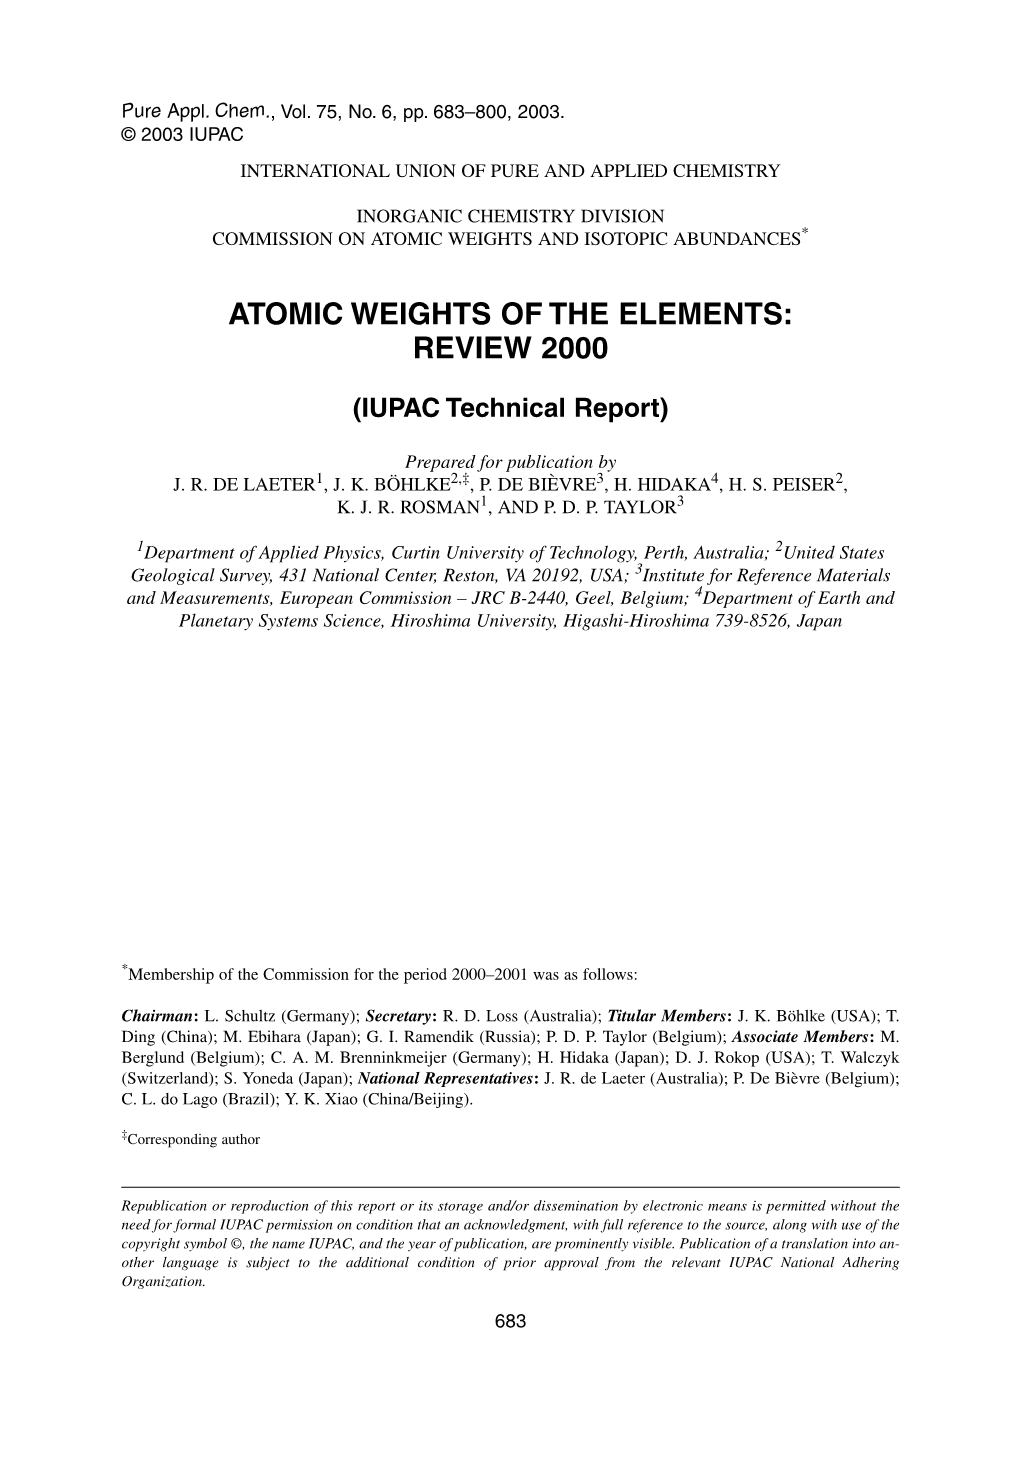 Atomic Weights of the Elements: Review 2000